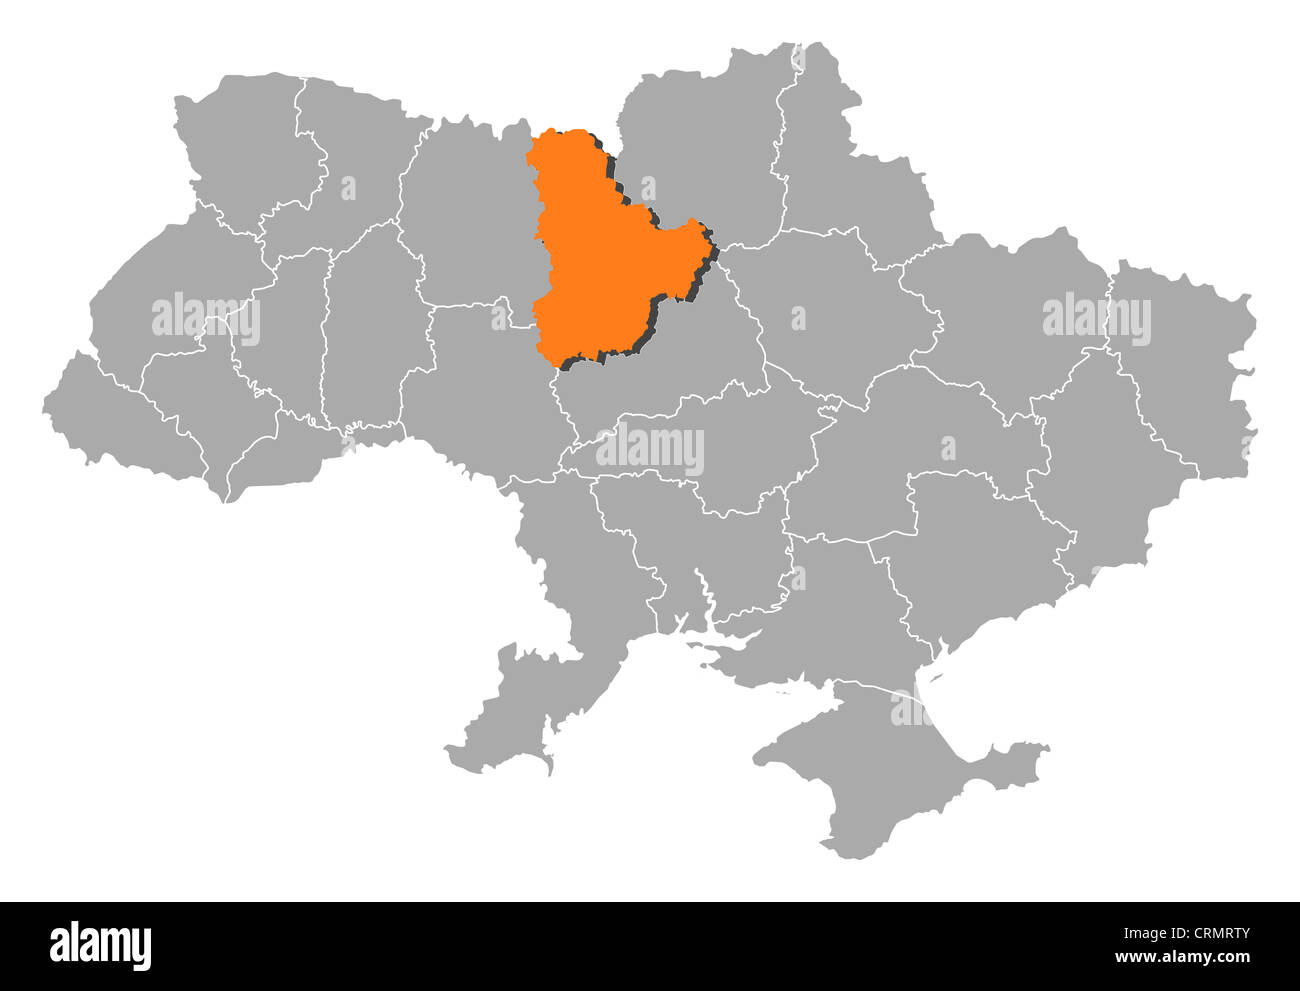 Political map of Ukraine with the several oblasts where Kiev is highlighted. Stock Photo